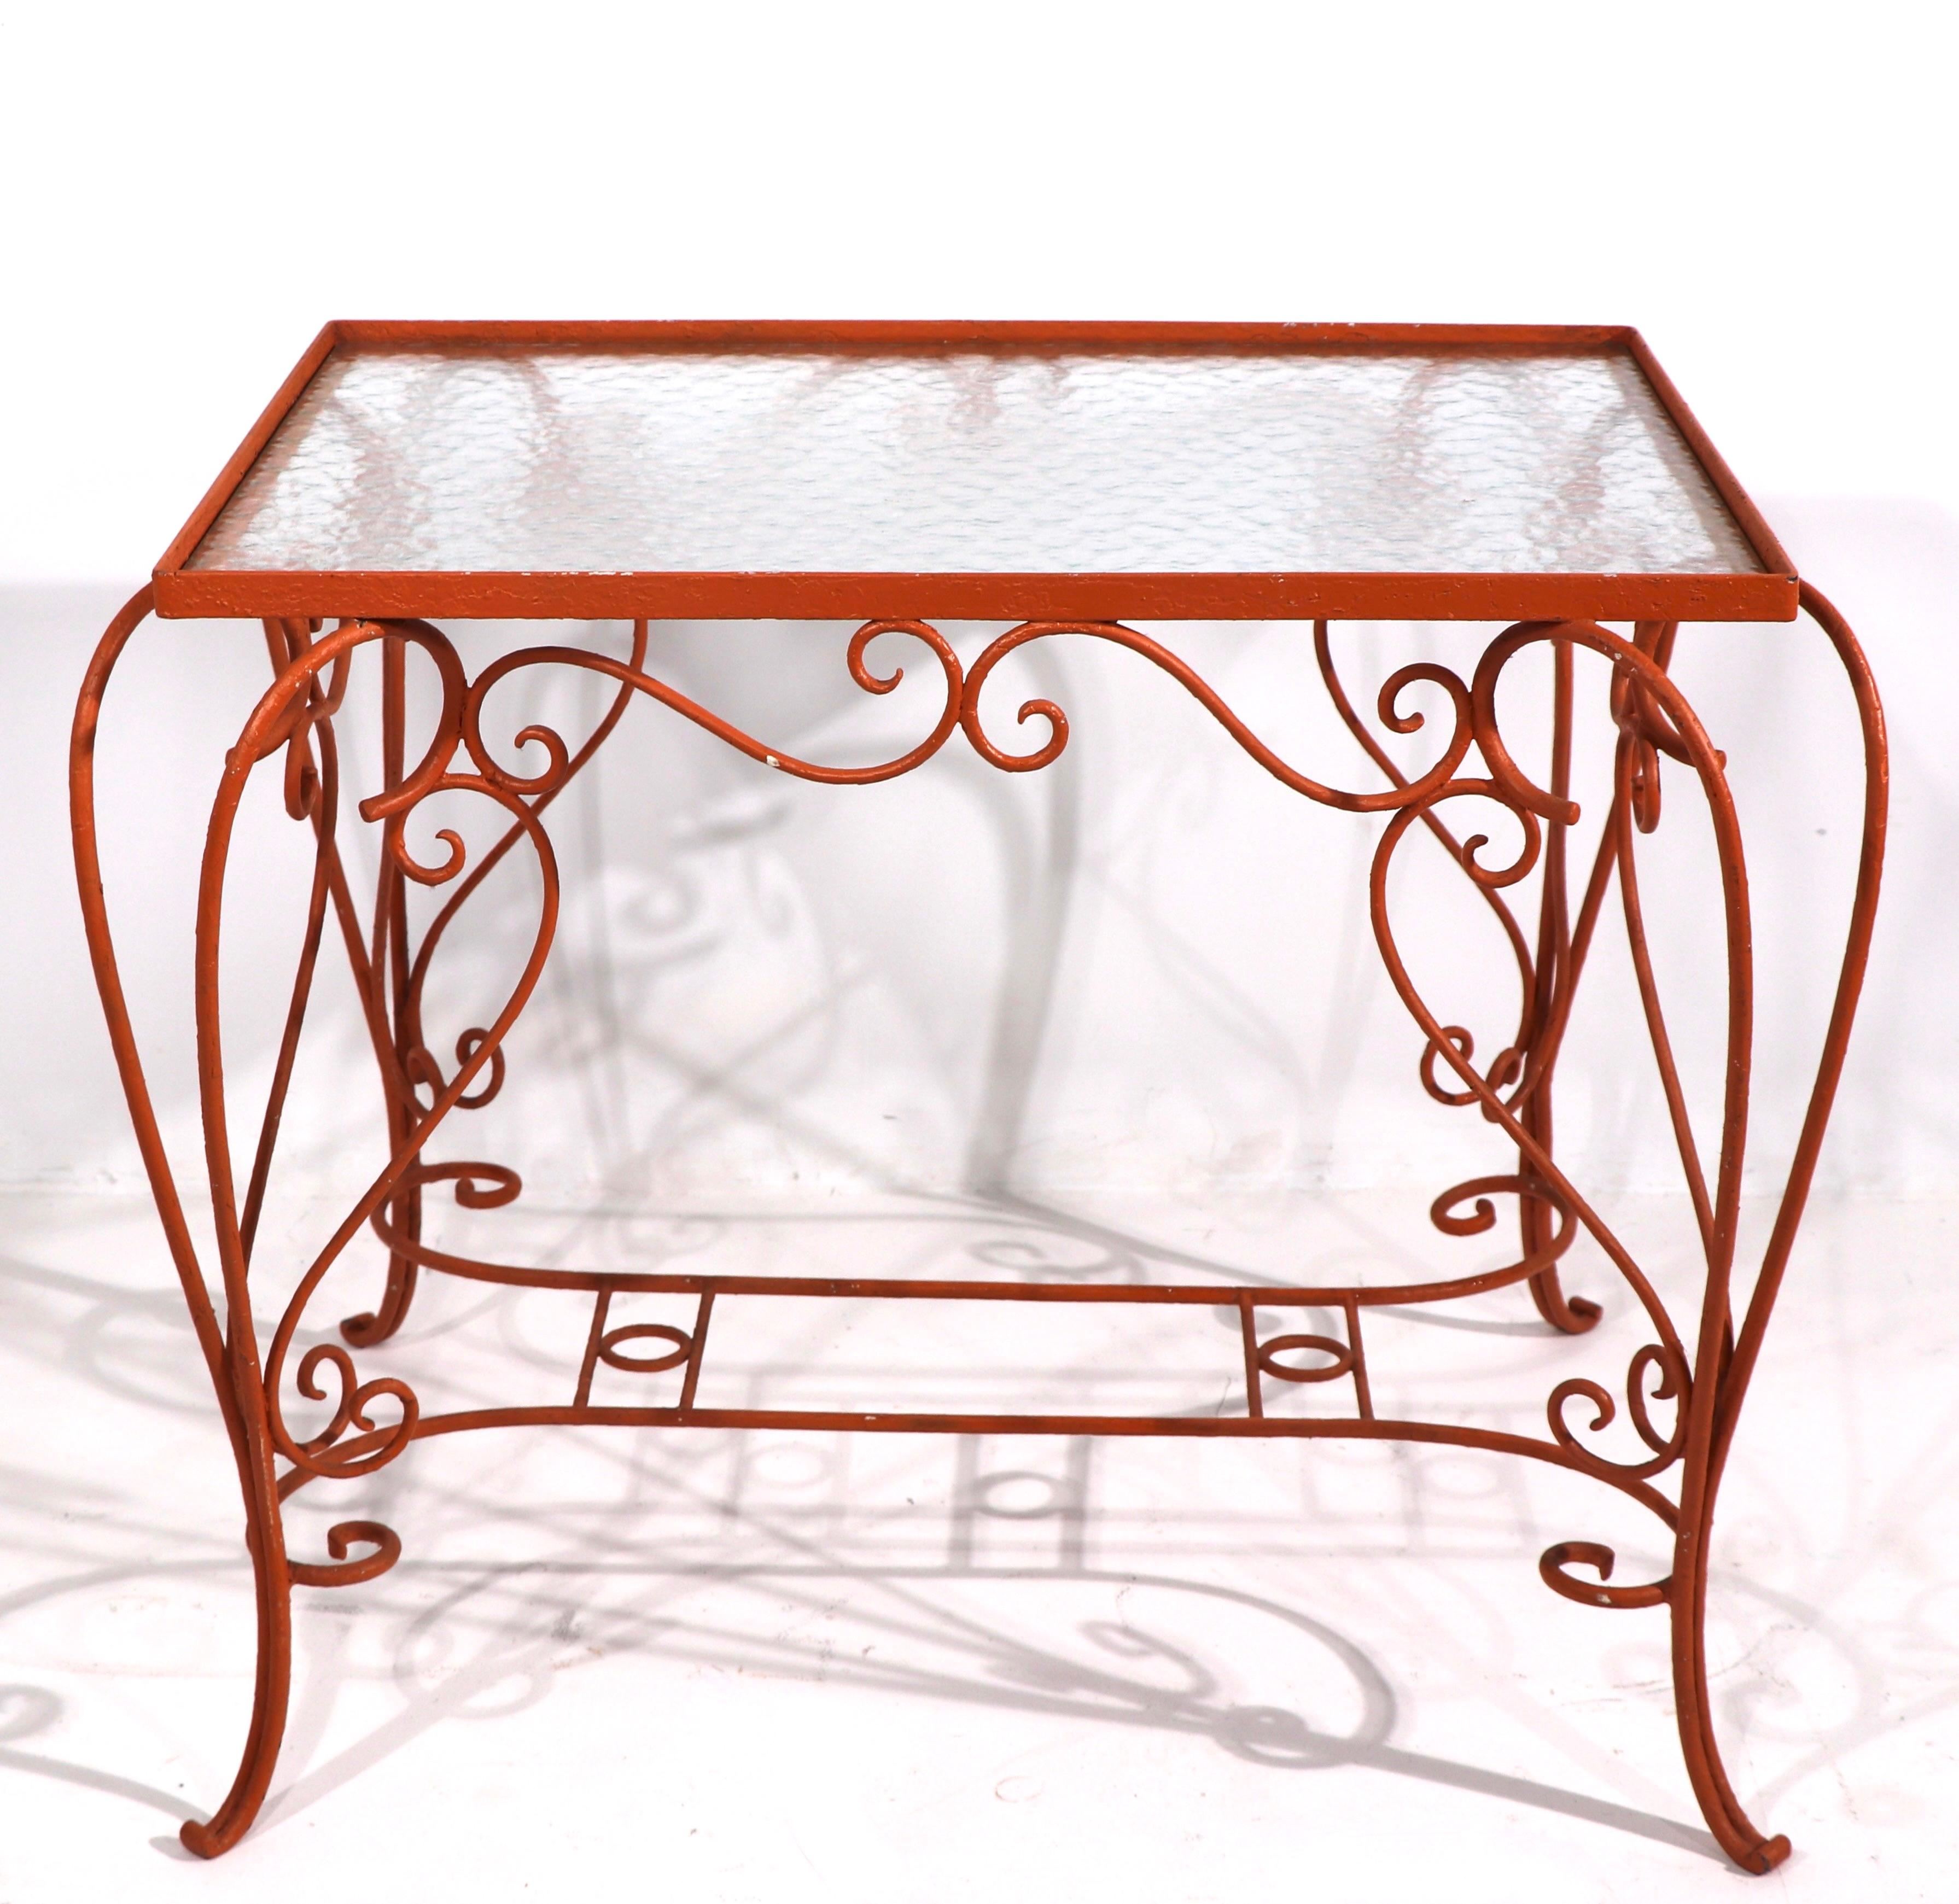 Charming wrought iron garden end, side table with ornate curlicue scroll work base and textured glass top. The table is currently in later orange/peach paint finish, usable as is or we offer custom powder coating if you prefer a different color, and